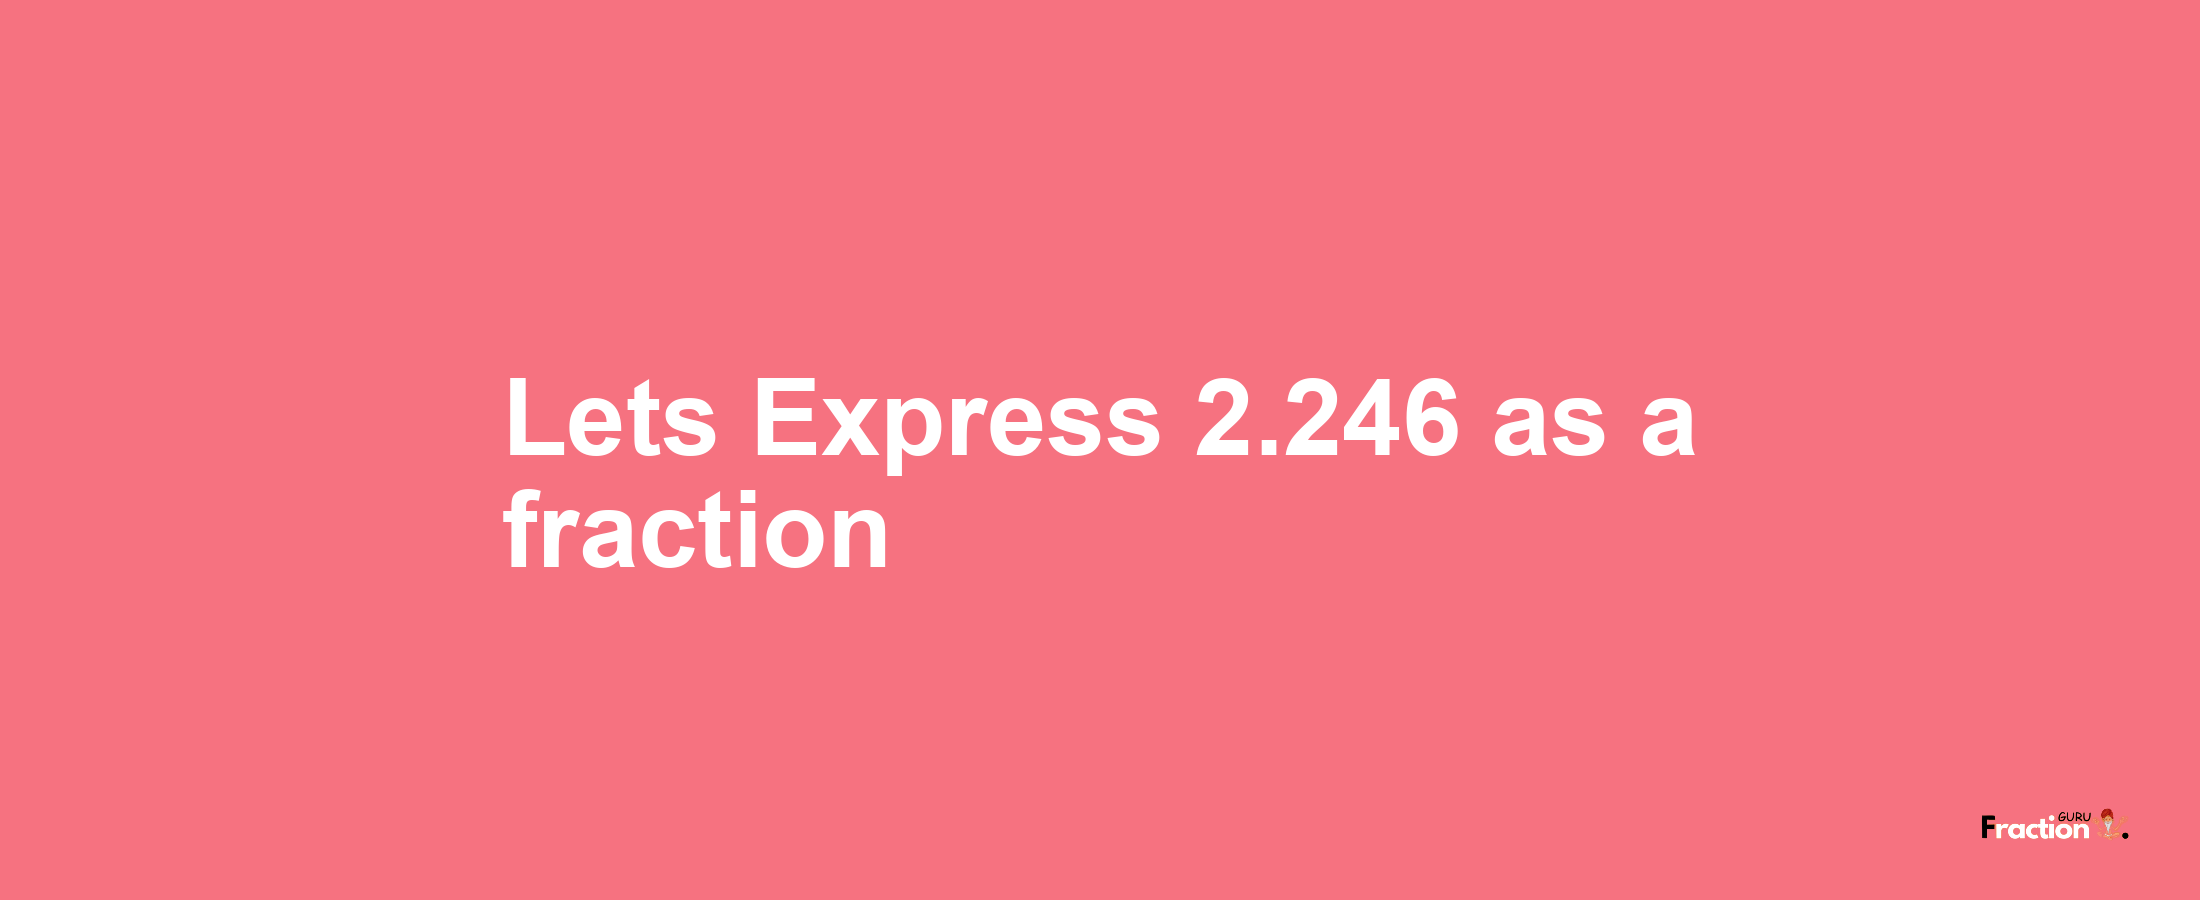 Lets Express 2.246 as afraction